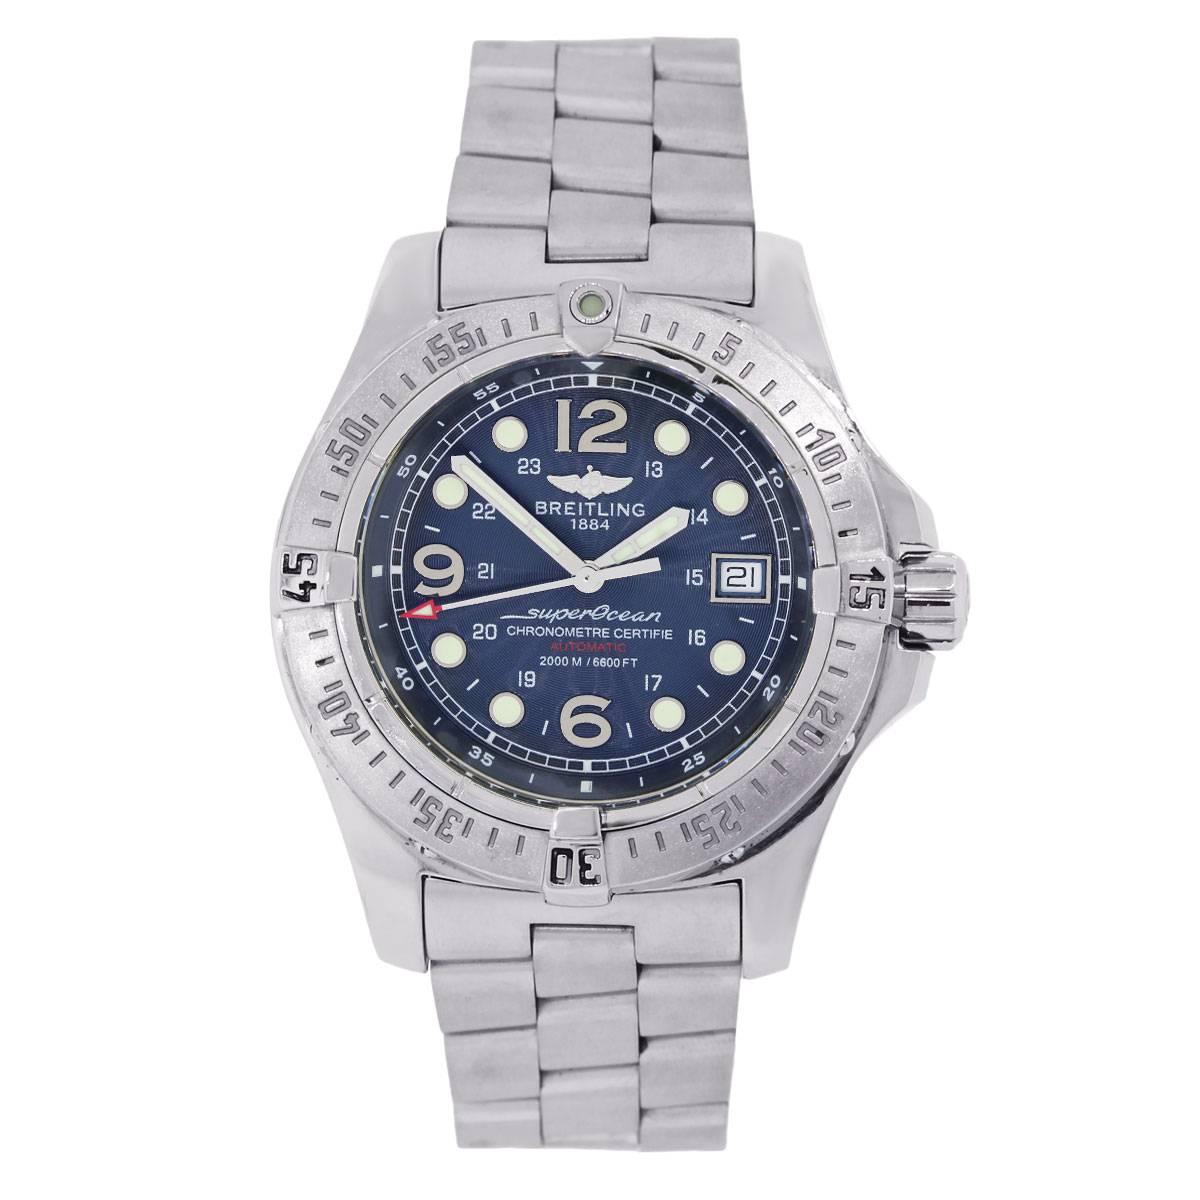 Brand: Breitling
MPN: A17390
Model: SuperOcean Steelfish
Case Material: Stainless steel
Case Diameter: 44mm
Crystal: Scratch resistant sapphire
Bezel: Unidirectional stainless steel bezel
Dial: Blue dial
Bracelet: Brushed stainless steel
Size: Will